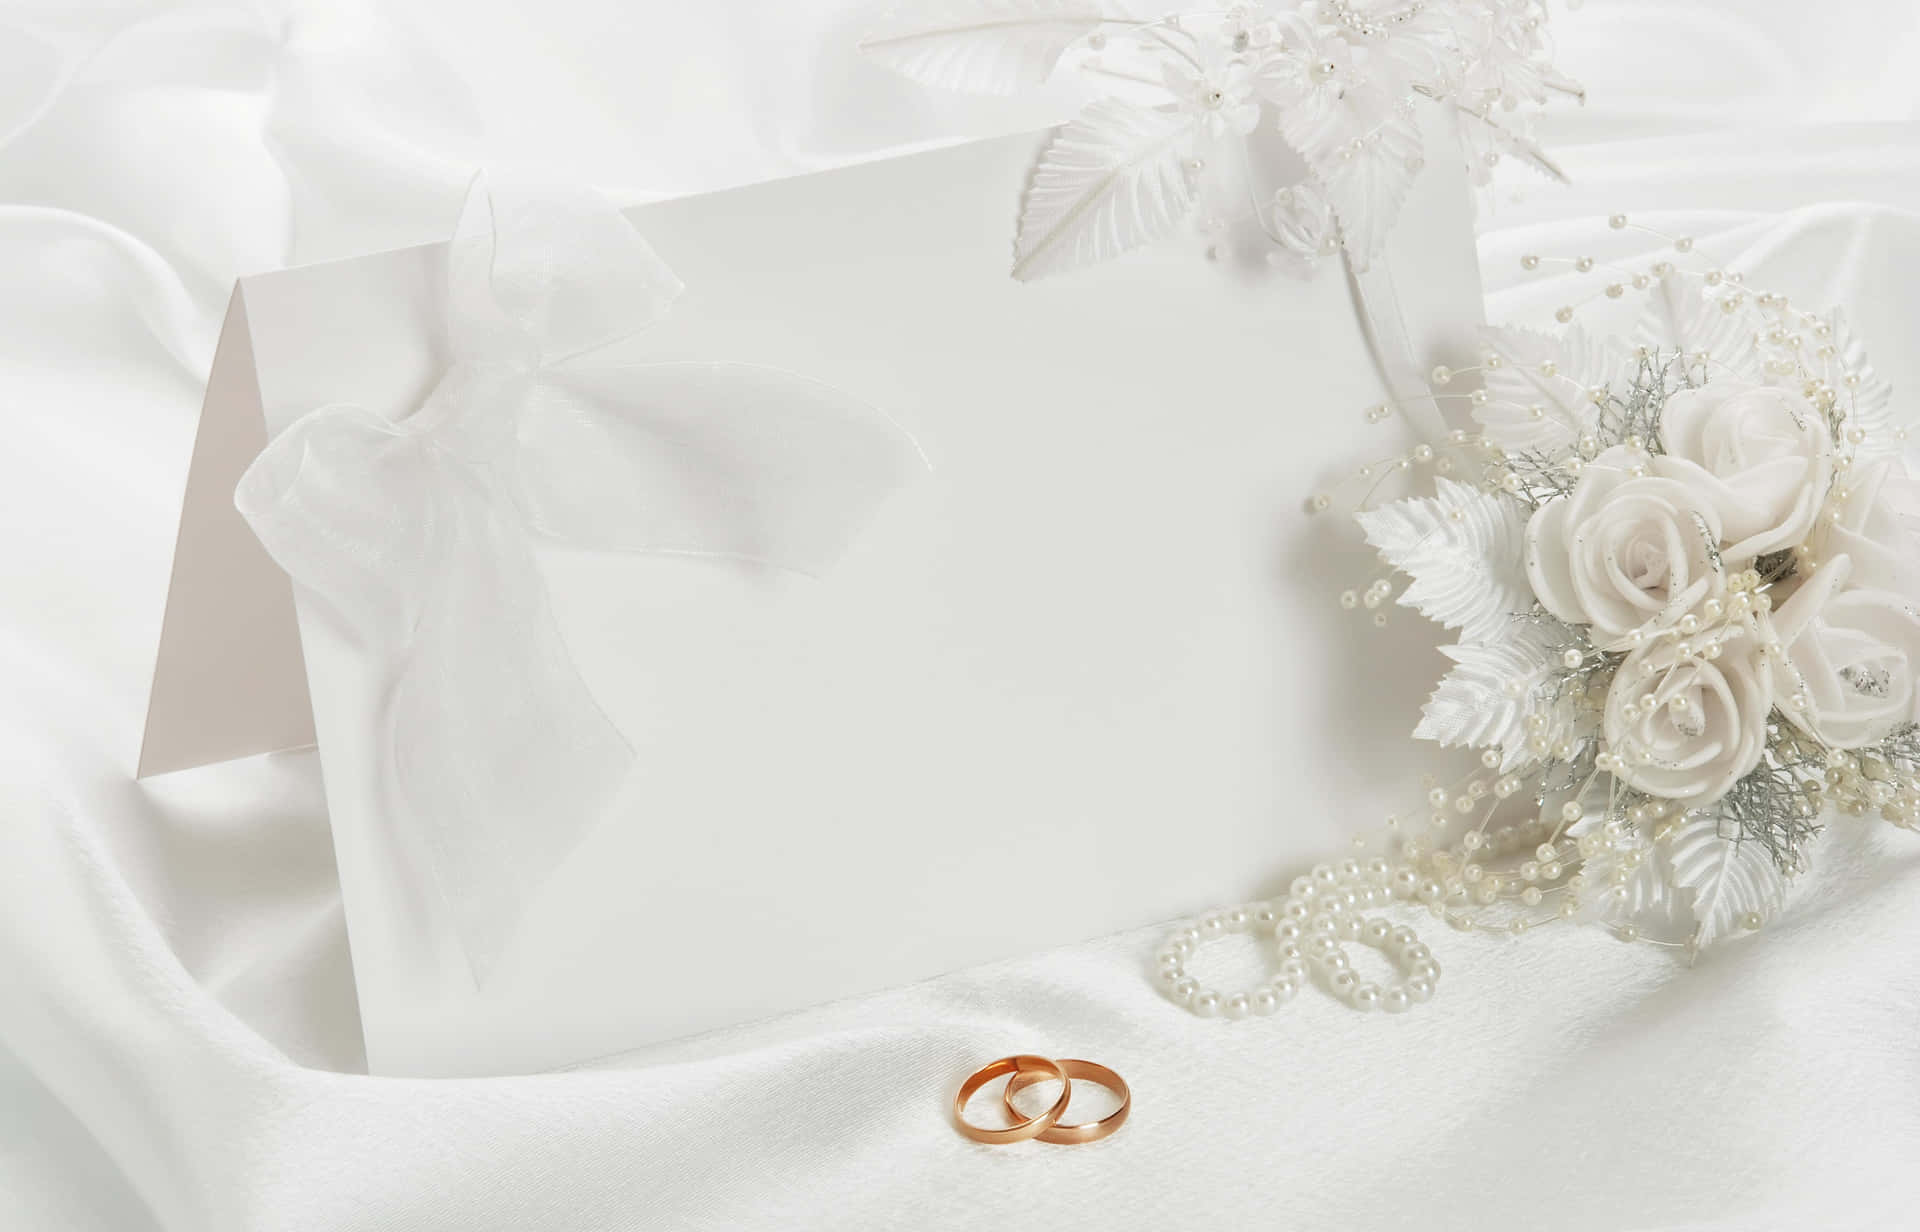 Wedding Invitation Card With Wedding Rings And Flowers